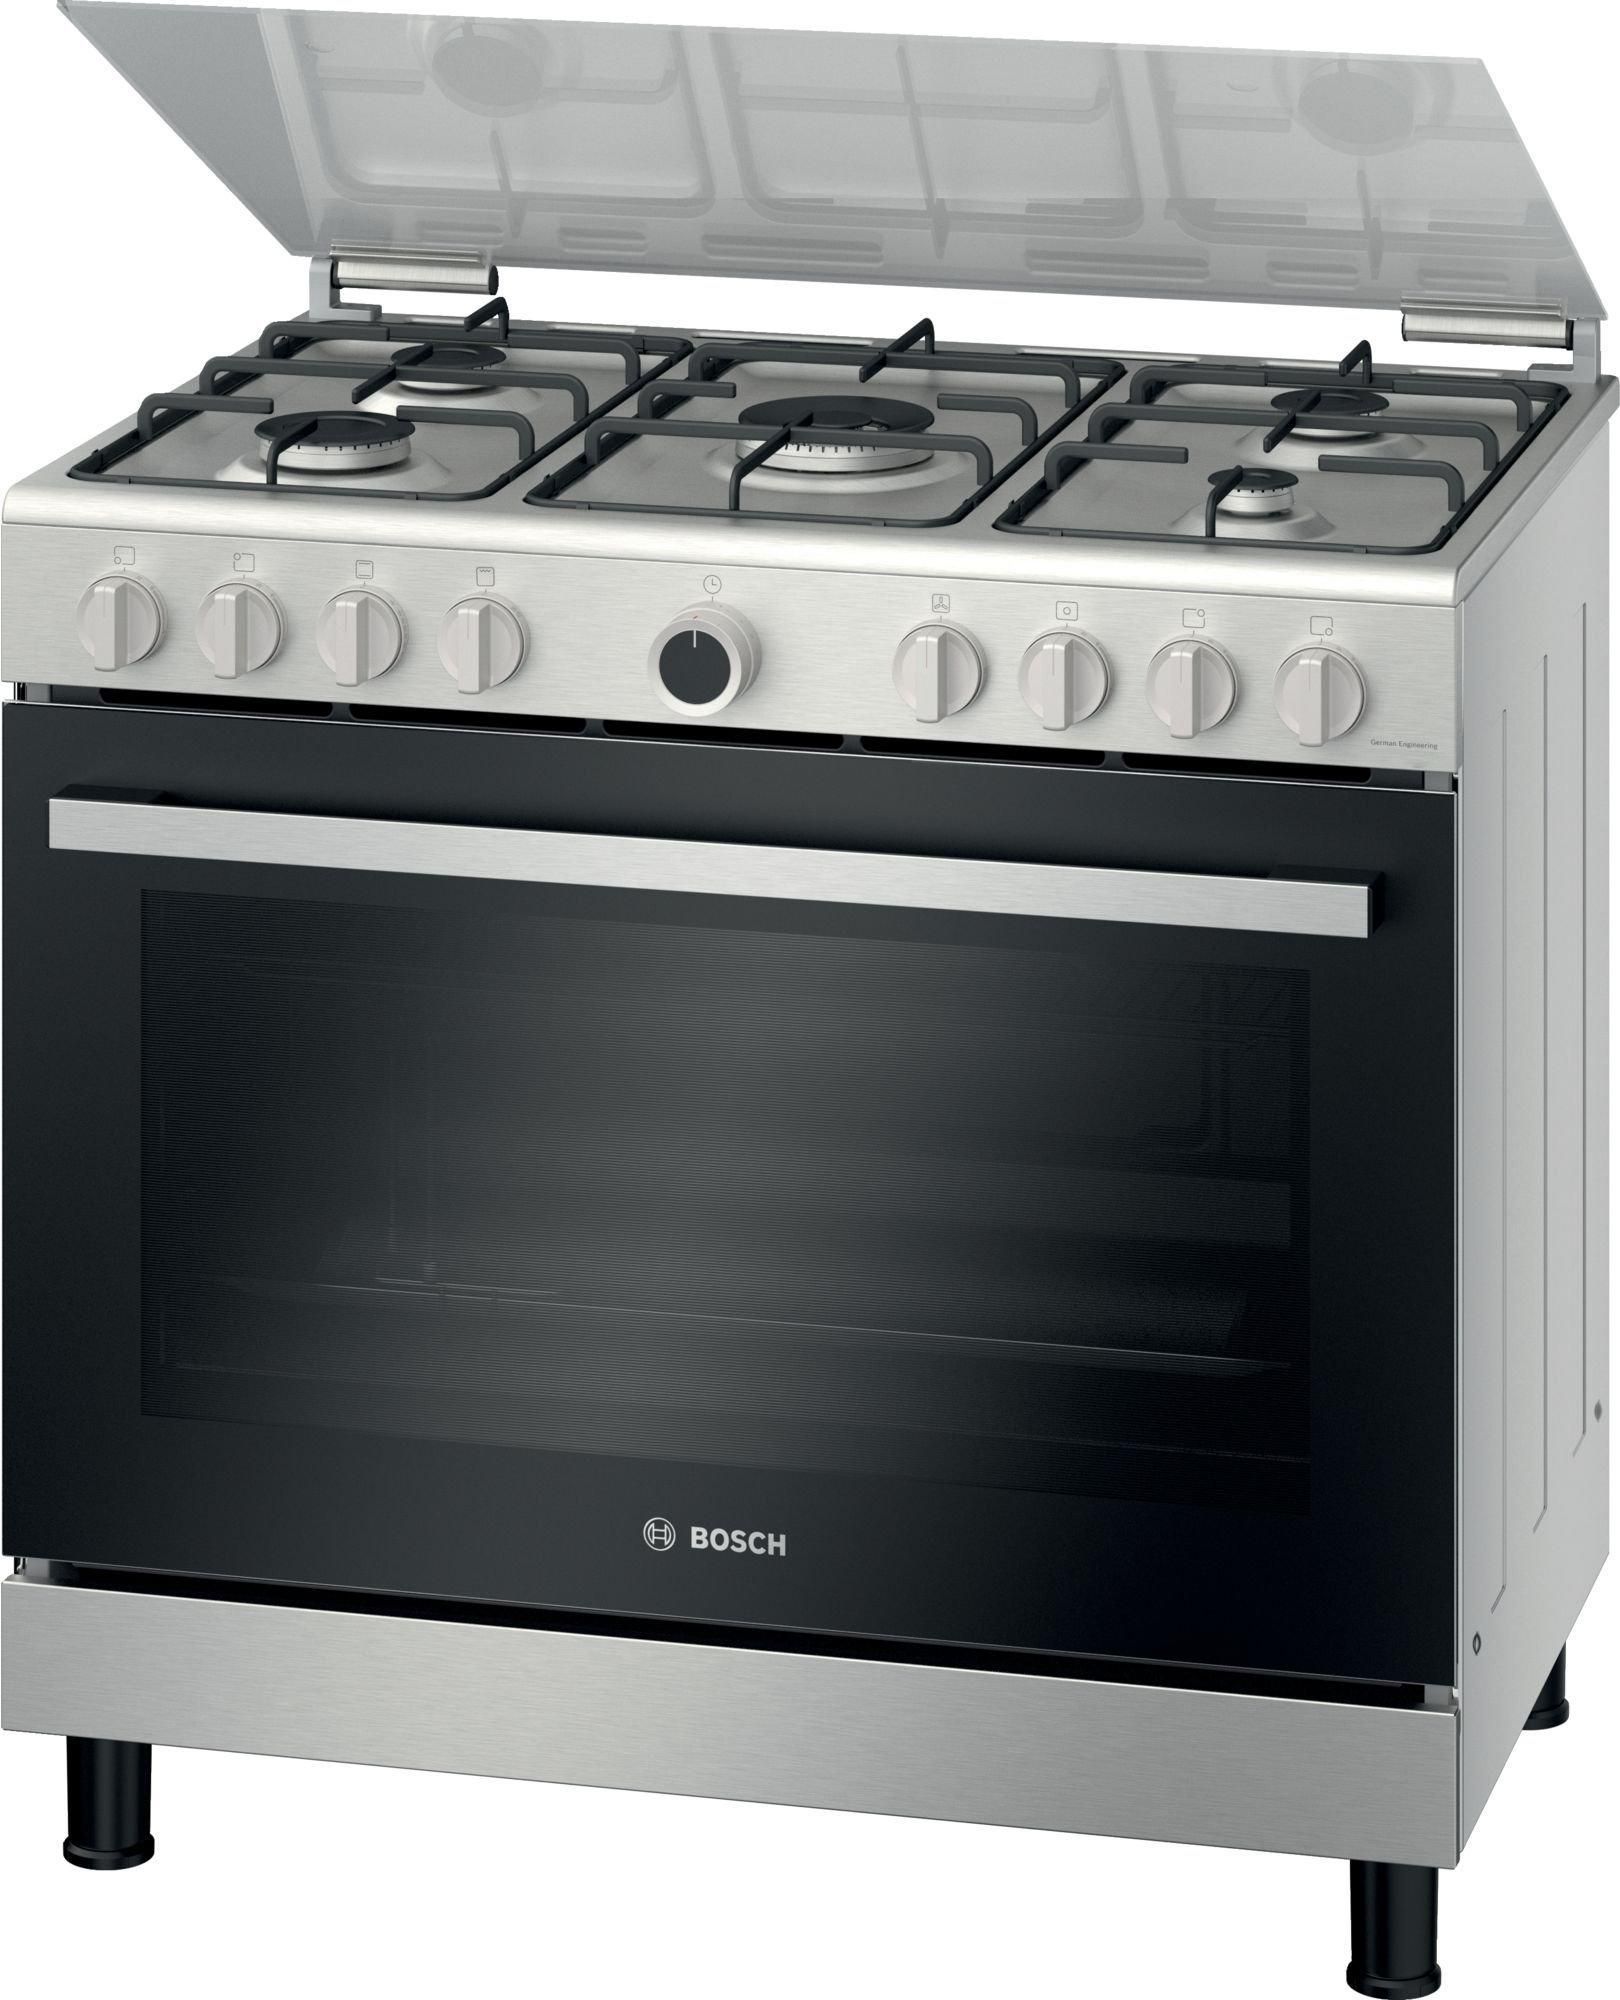 Bosch Gas Cooker, 90X60, 5 Gas Burner, full safety, Stainless Steel/Black